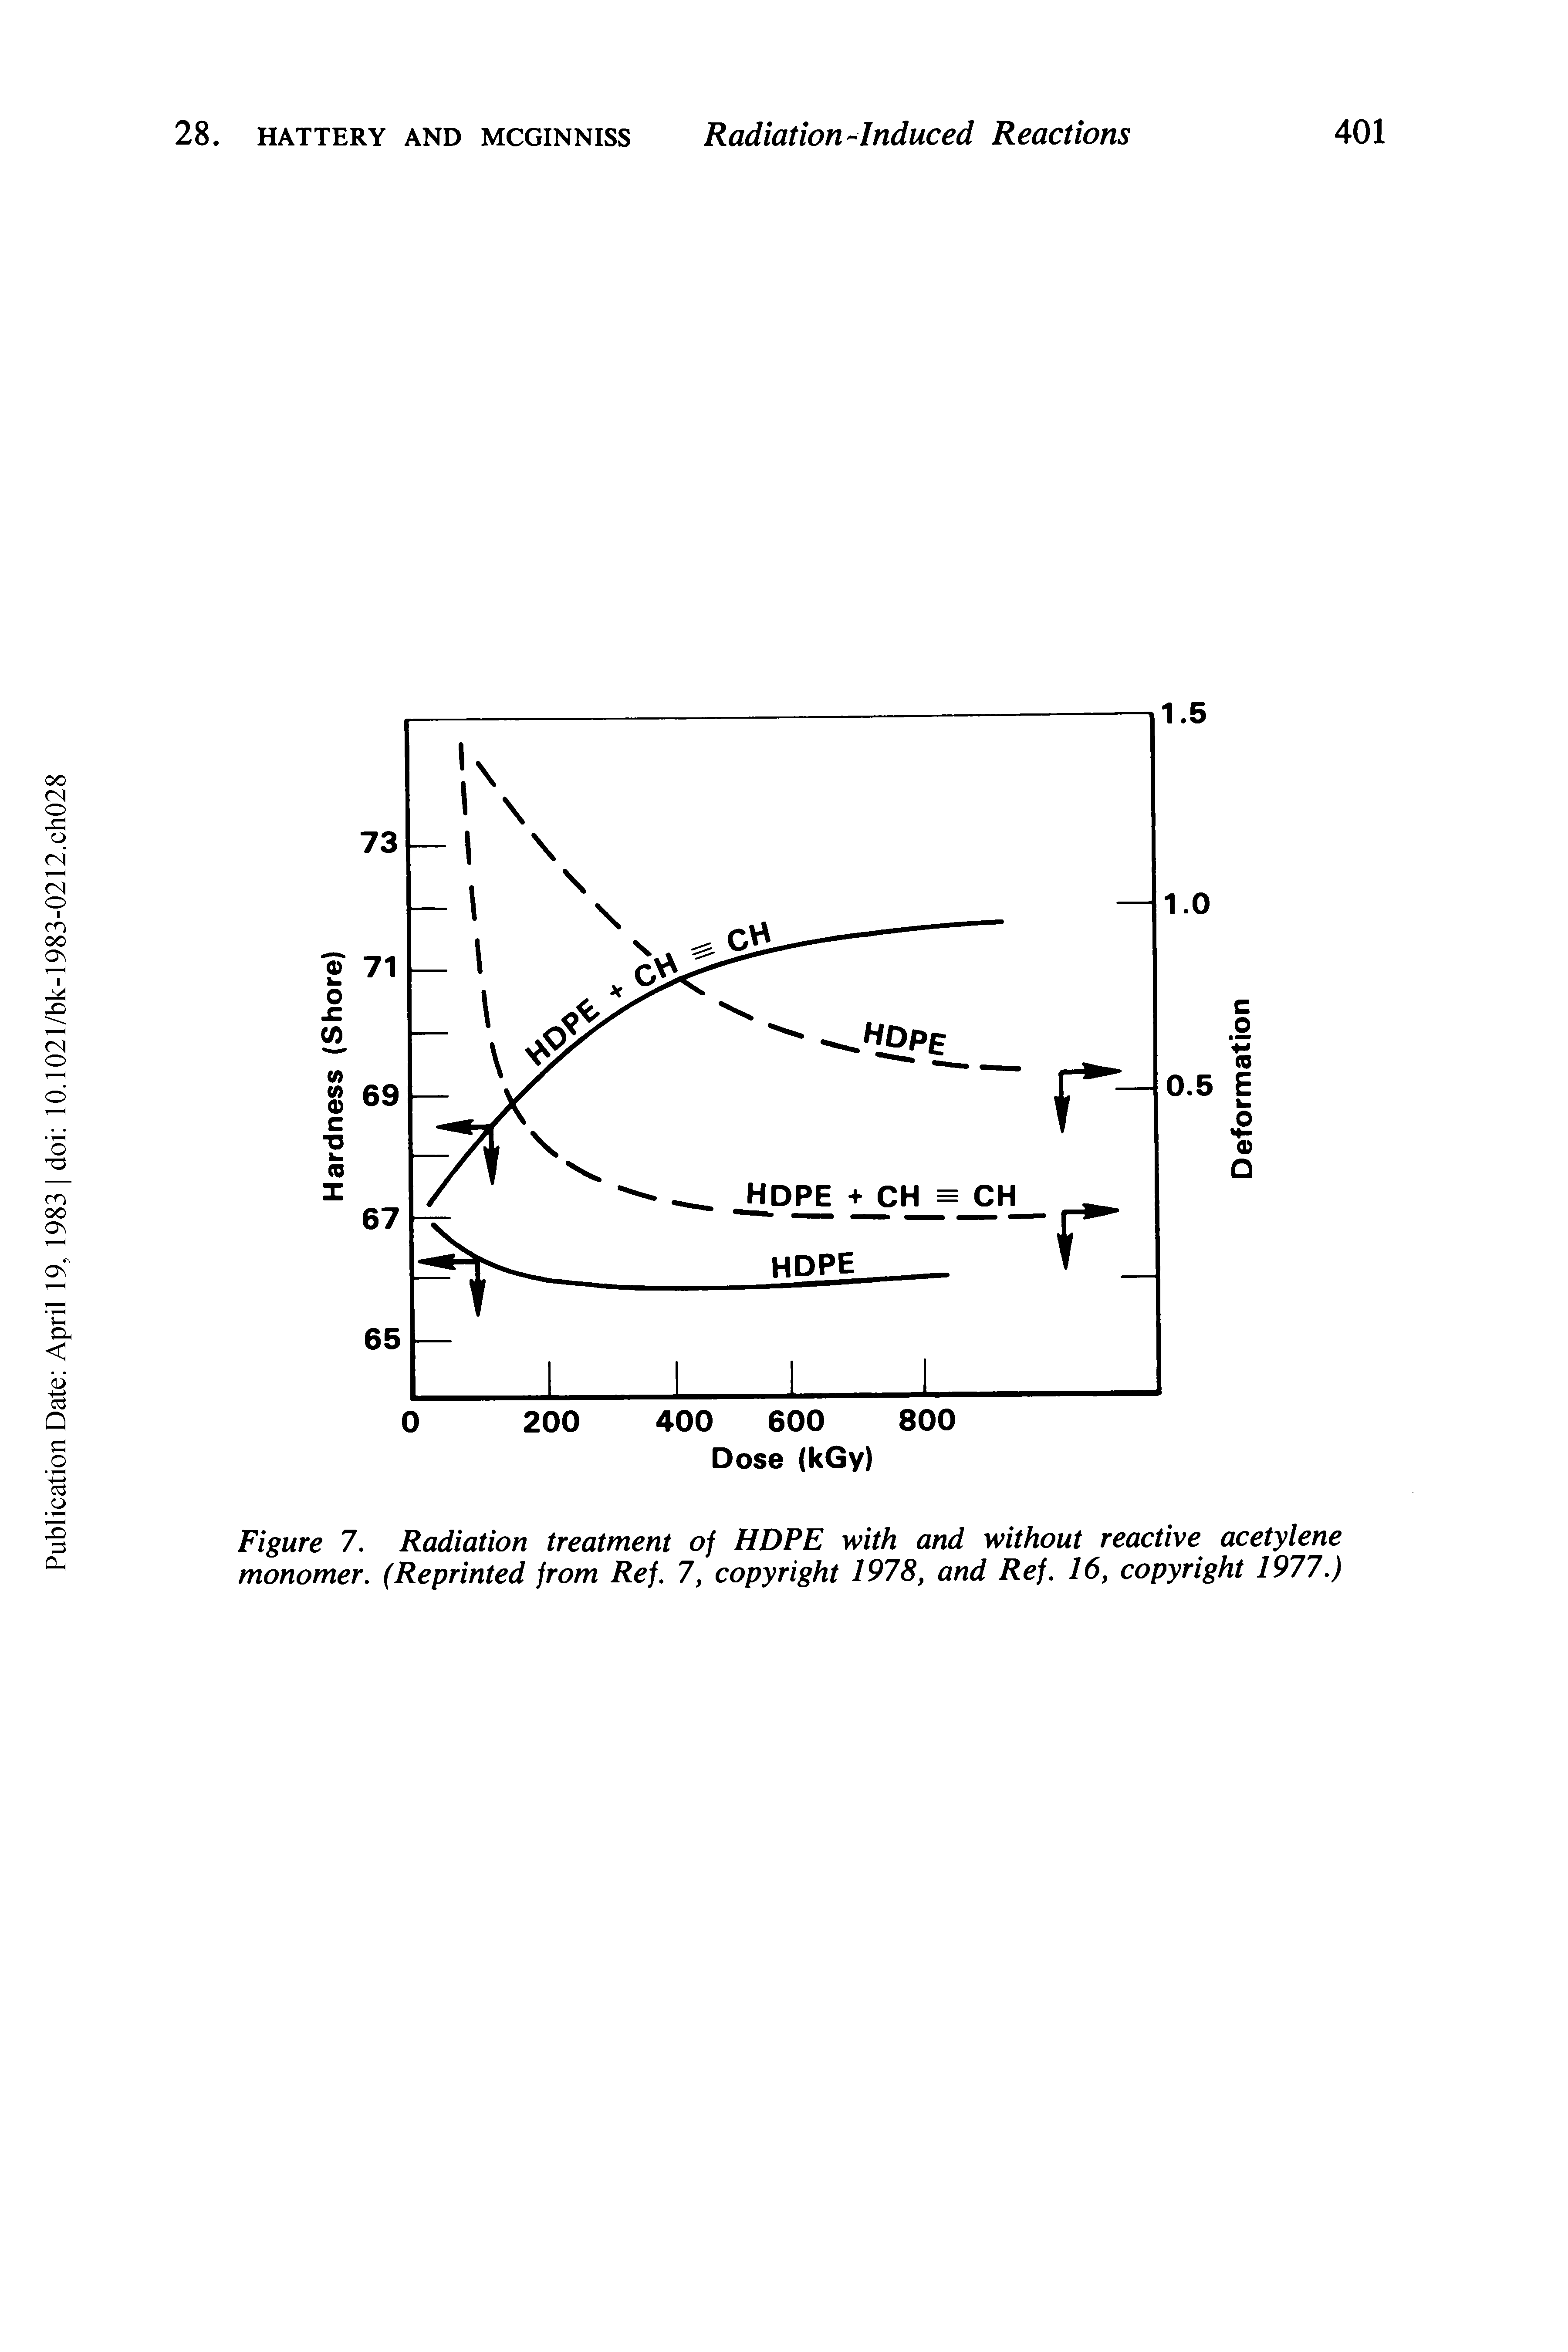 Figure 7. Radiation treatment of HDPE with and without reactive acetylene monomer. (Reprinted from Ref. 7, copyright 1978, and Ref. 16, copyright 1977.)...